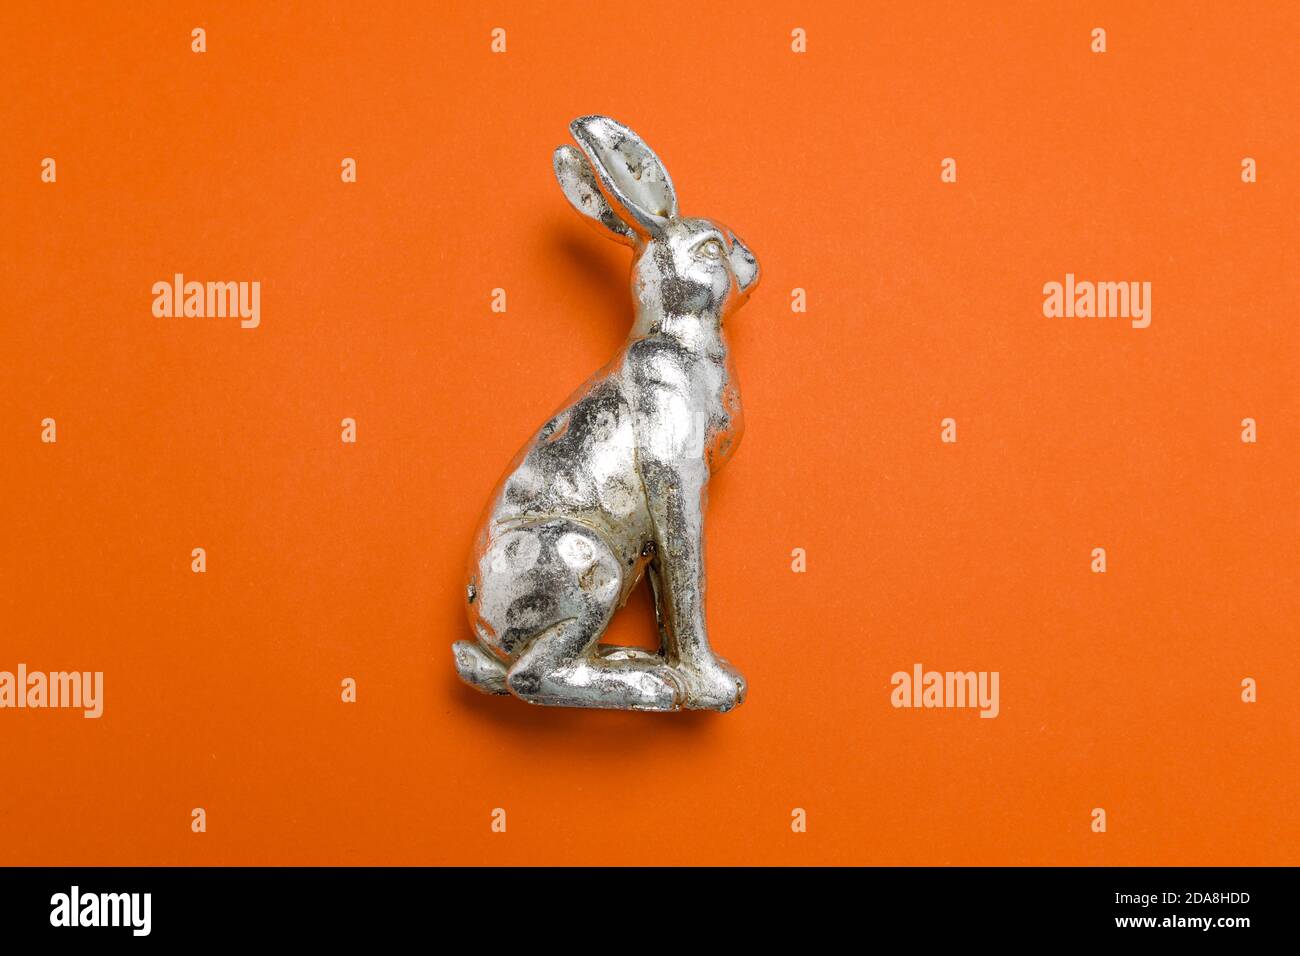 Side view of a silver metallic easter bunny figure on a red uniform background with light soft shadows, use as easter virtual meeting background. Stock Photo